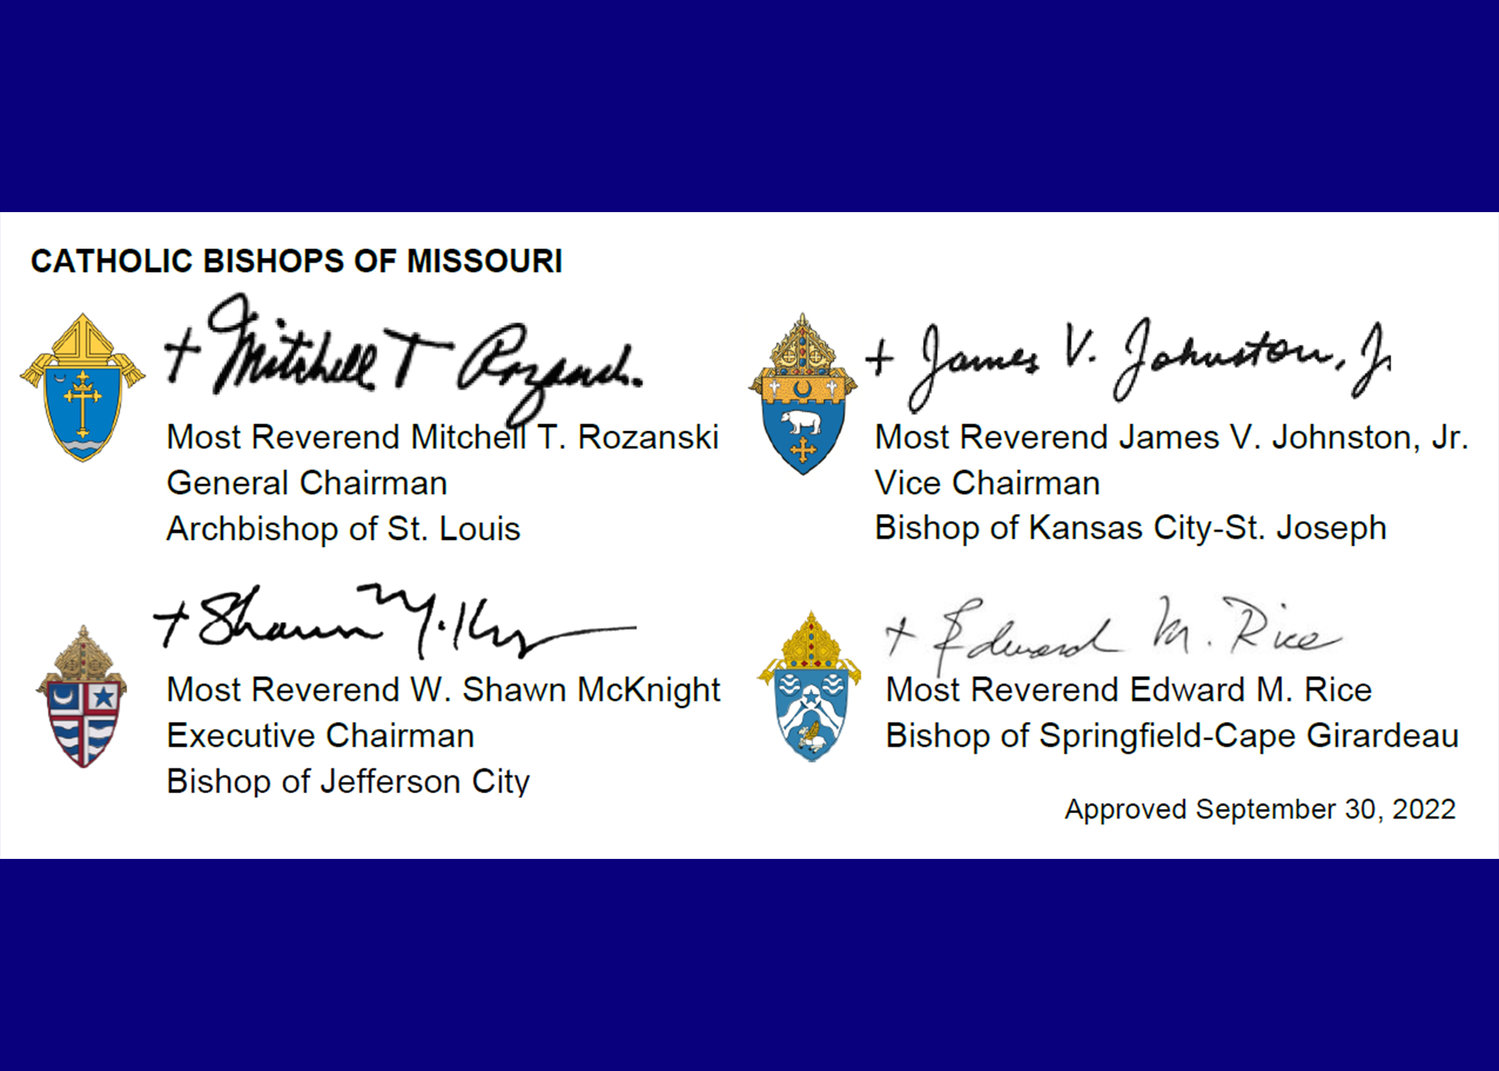 The statement’s signatories include: Archbishop Mitchell T. Rozanski of St. Louis; Bishop James V. Johnston Jr. of Kansas City-St. Joseph; Bishop McKnight; and Bishop Edward M. Rice of Springfield-Cape Girardeau, functioning in their role as officers of the Missouri Catholic Conference (MCC).